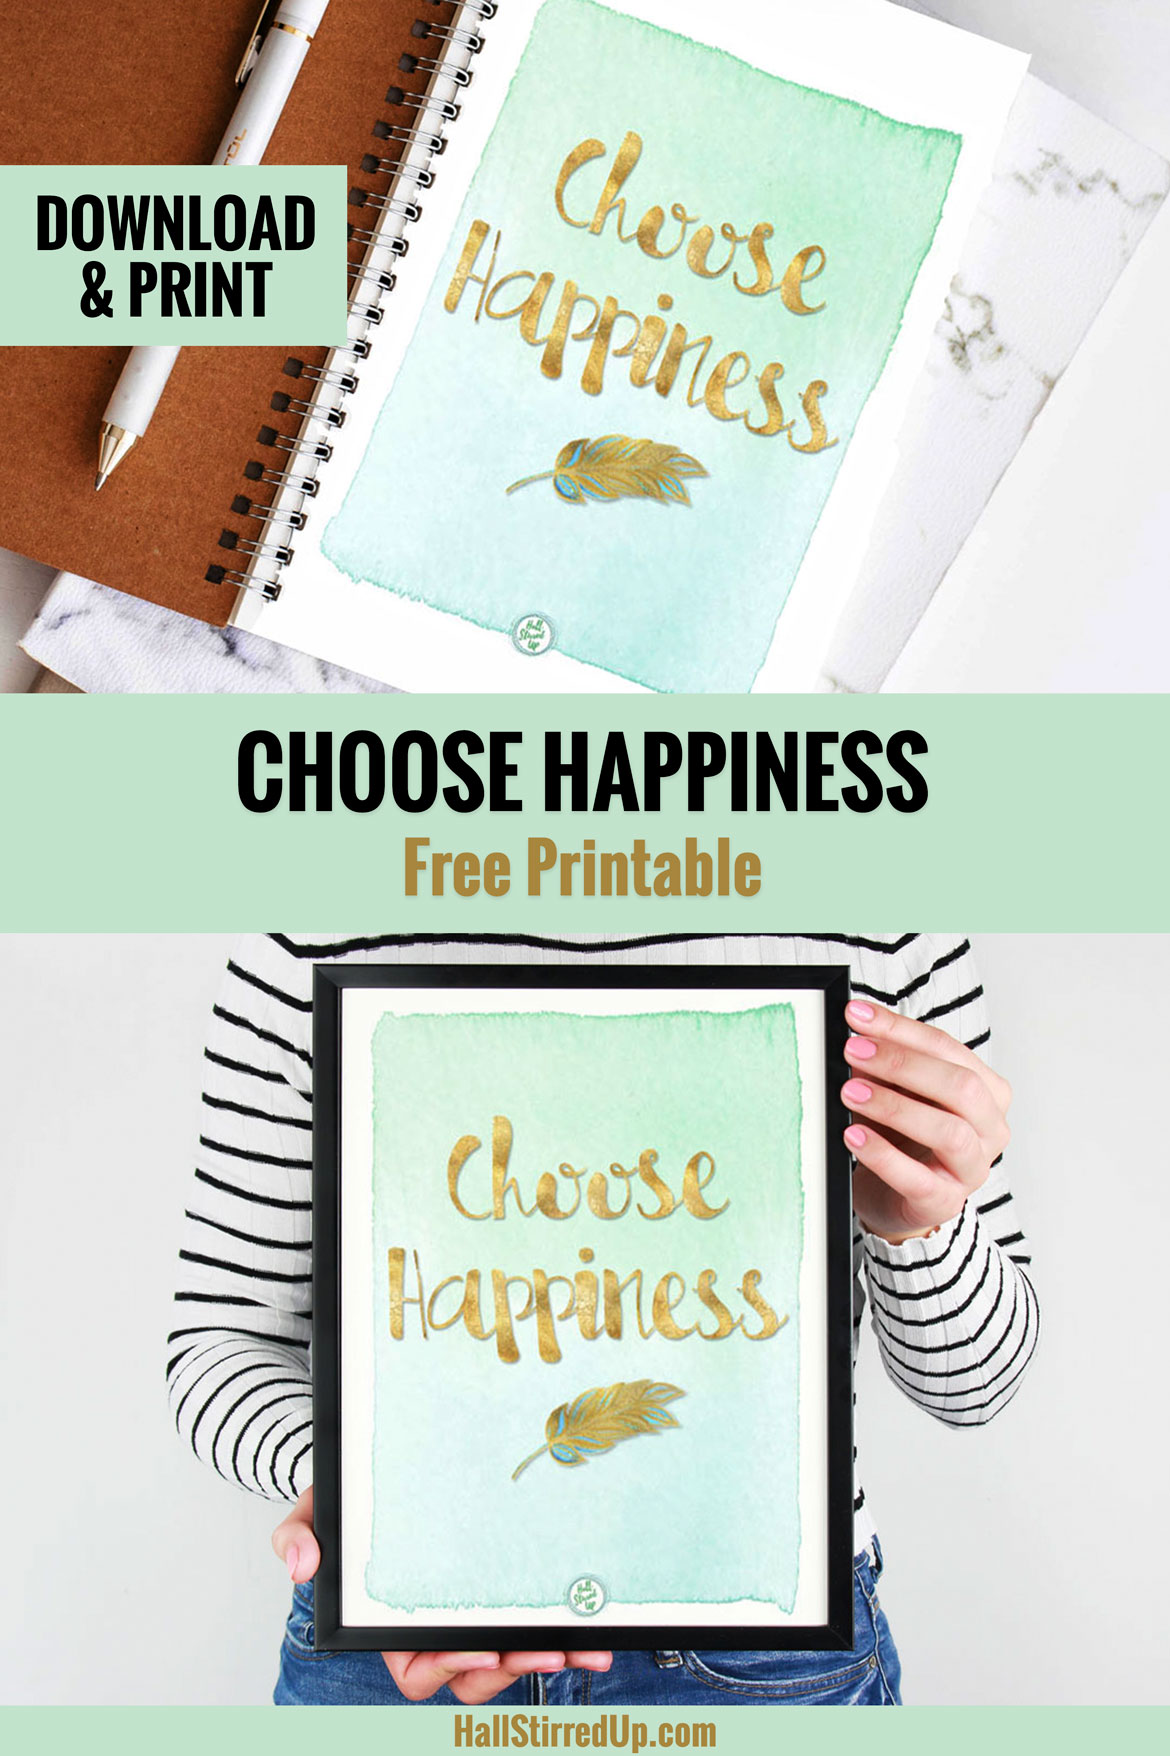 Pursuing a positive mindset will change your life Includes Choose Happiness printable